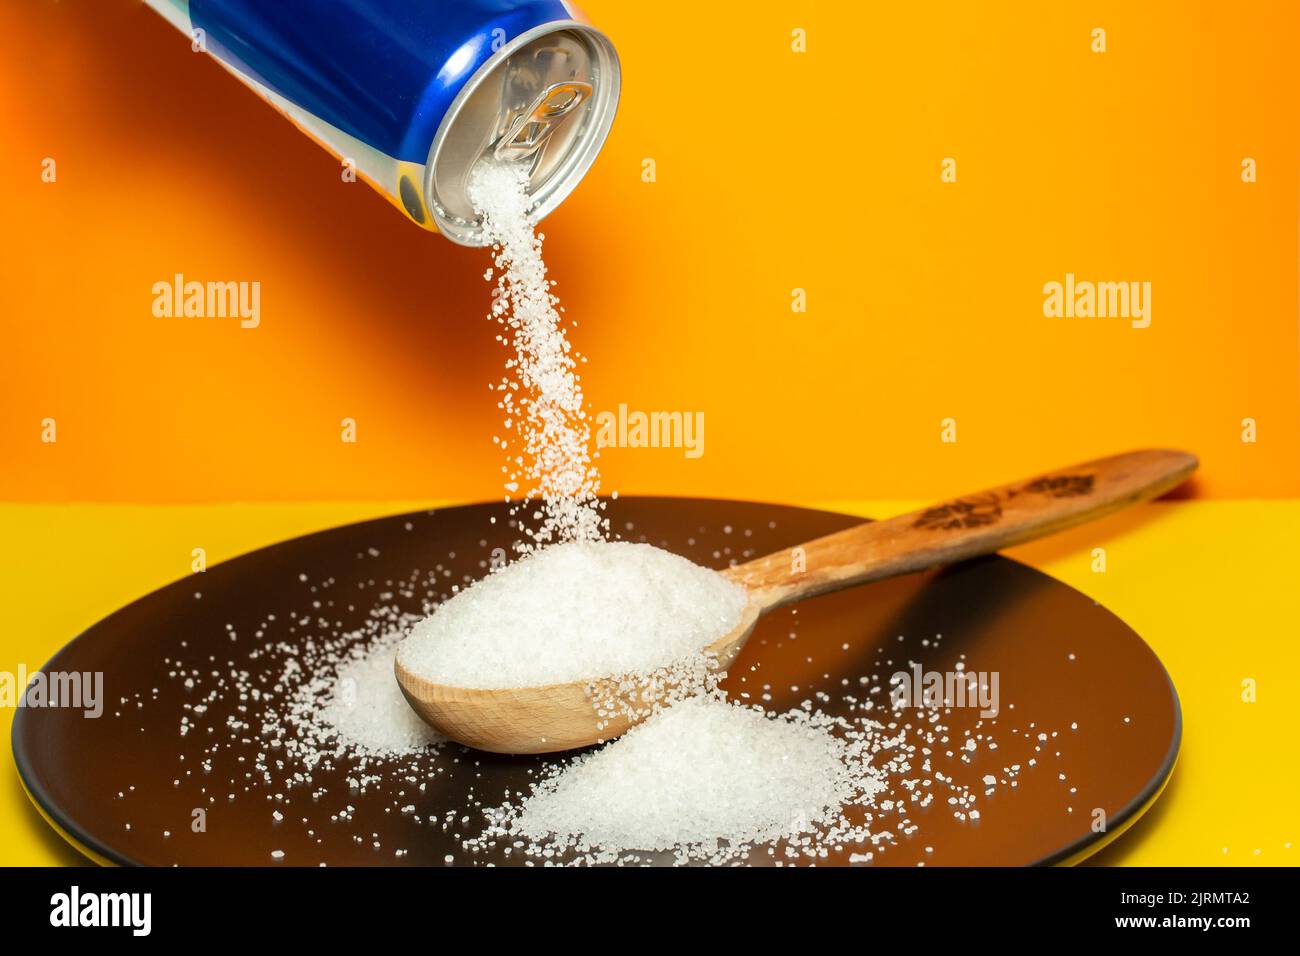 Pouring crystal sugar from a blue can to a wooden spoon on a black plate and orange background.  Motion blur on sugar texture. Sugar danger concept Stock Photo